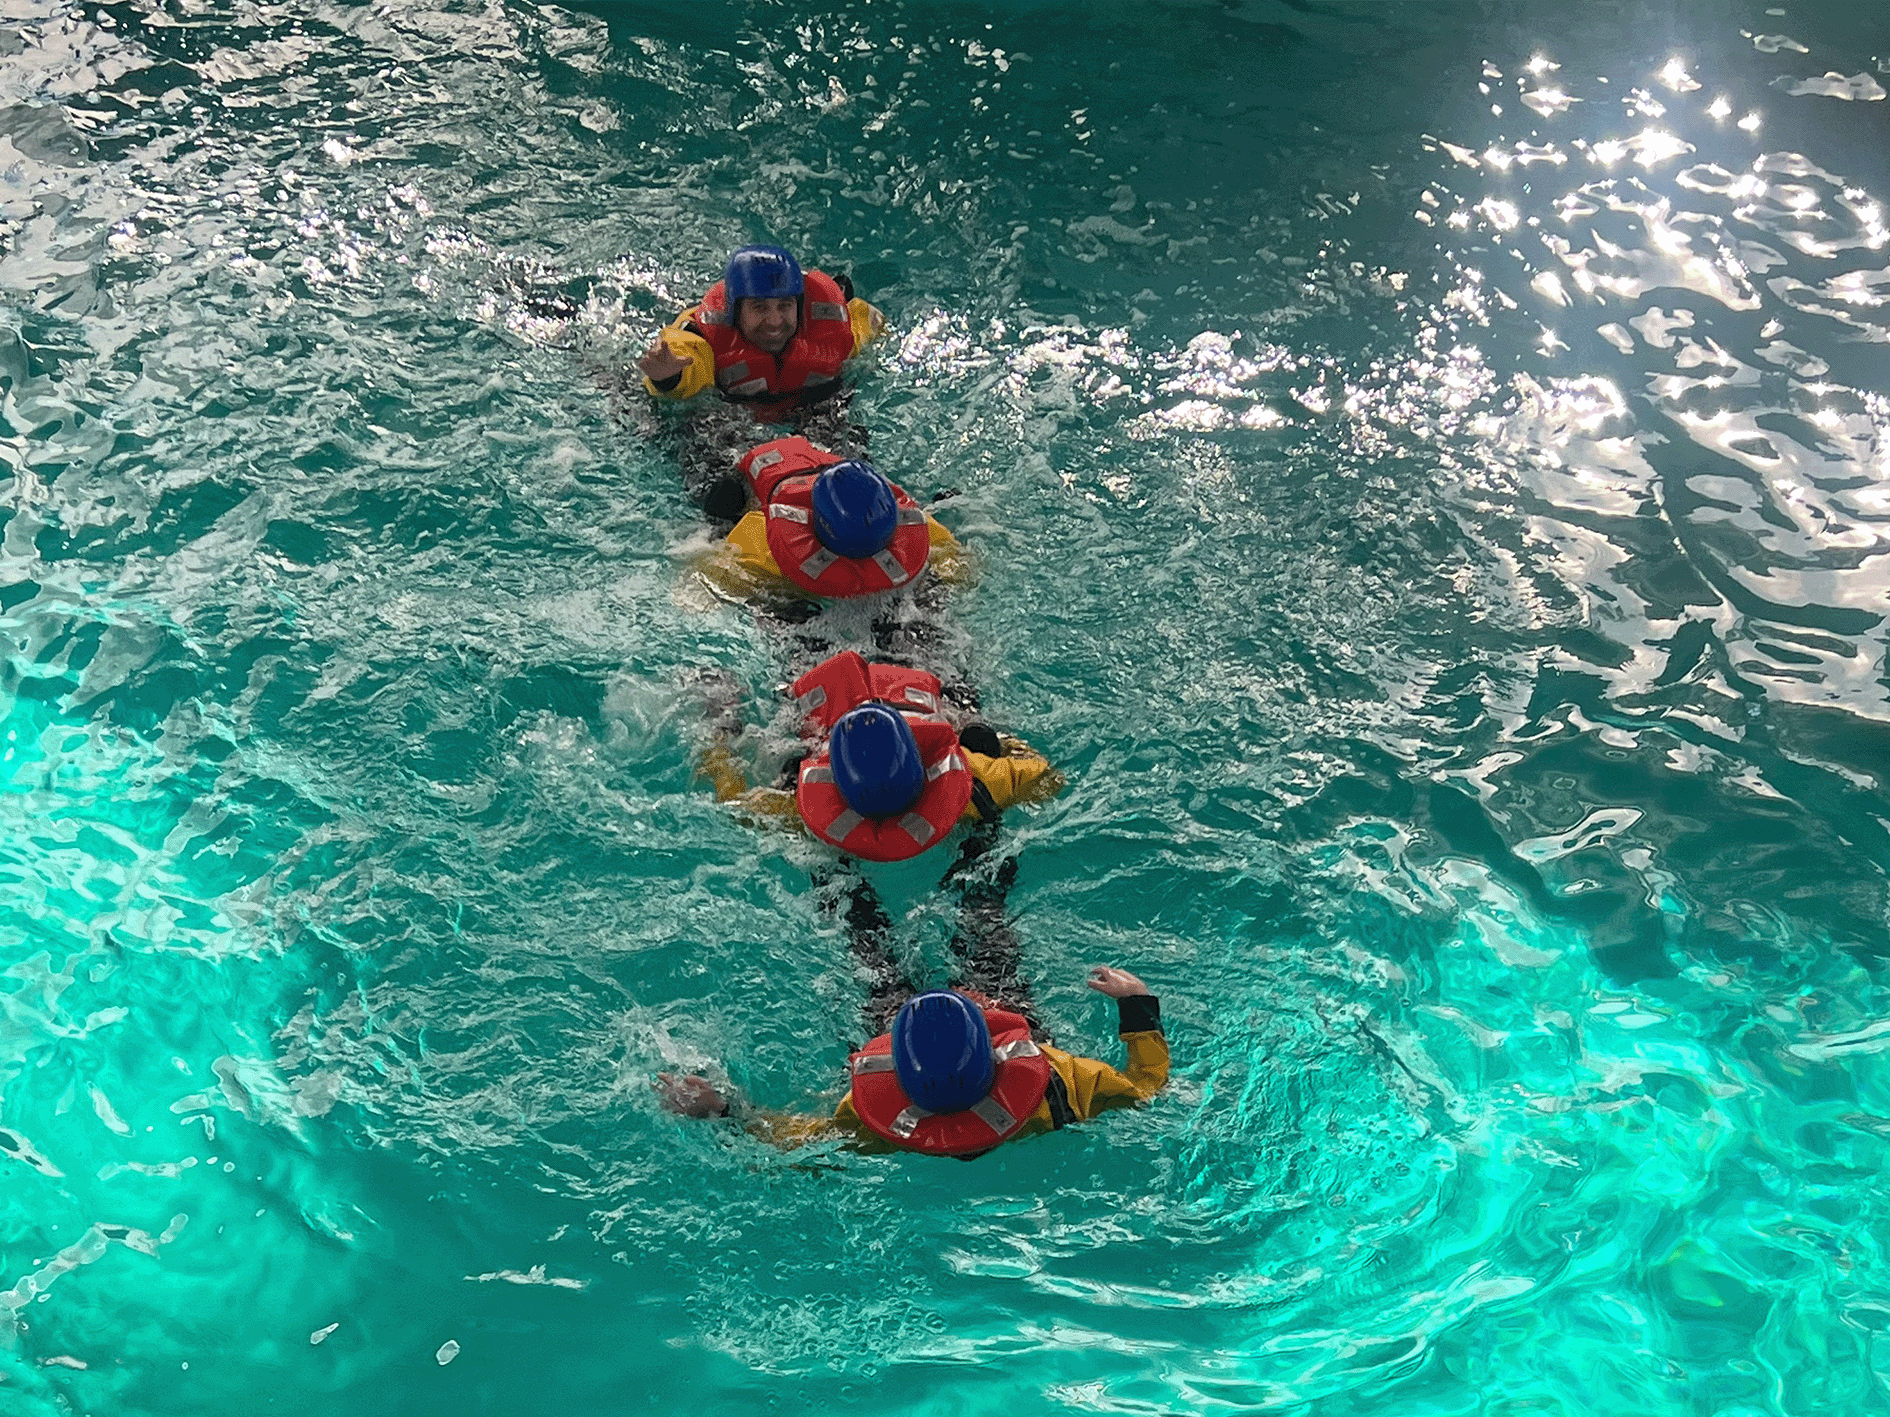 Sea Survival swimming in group